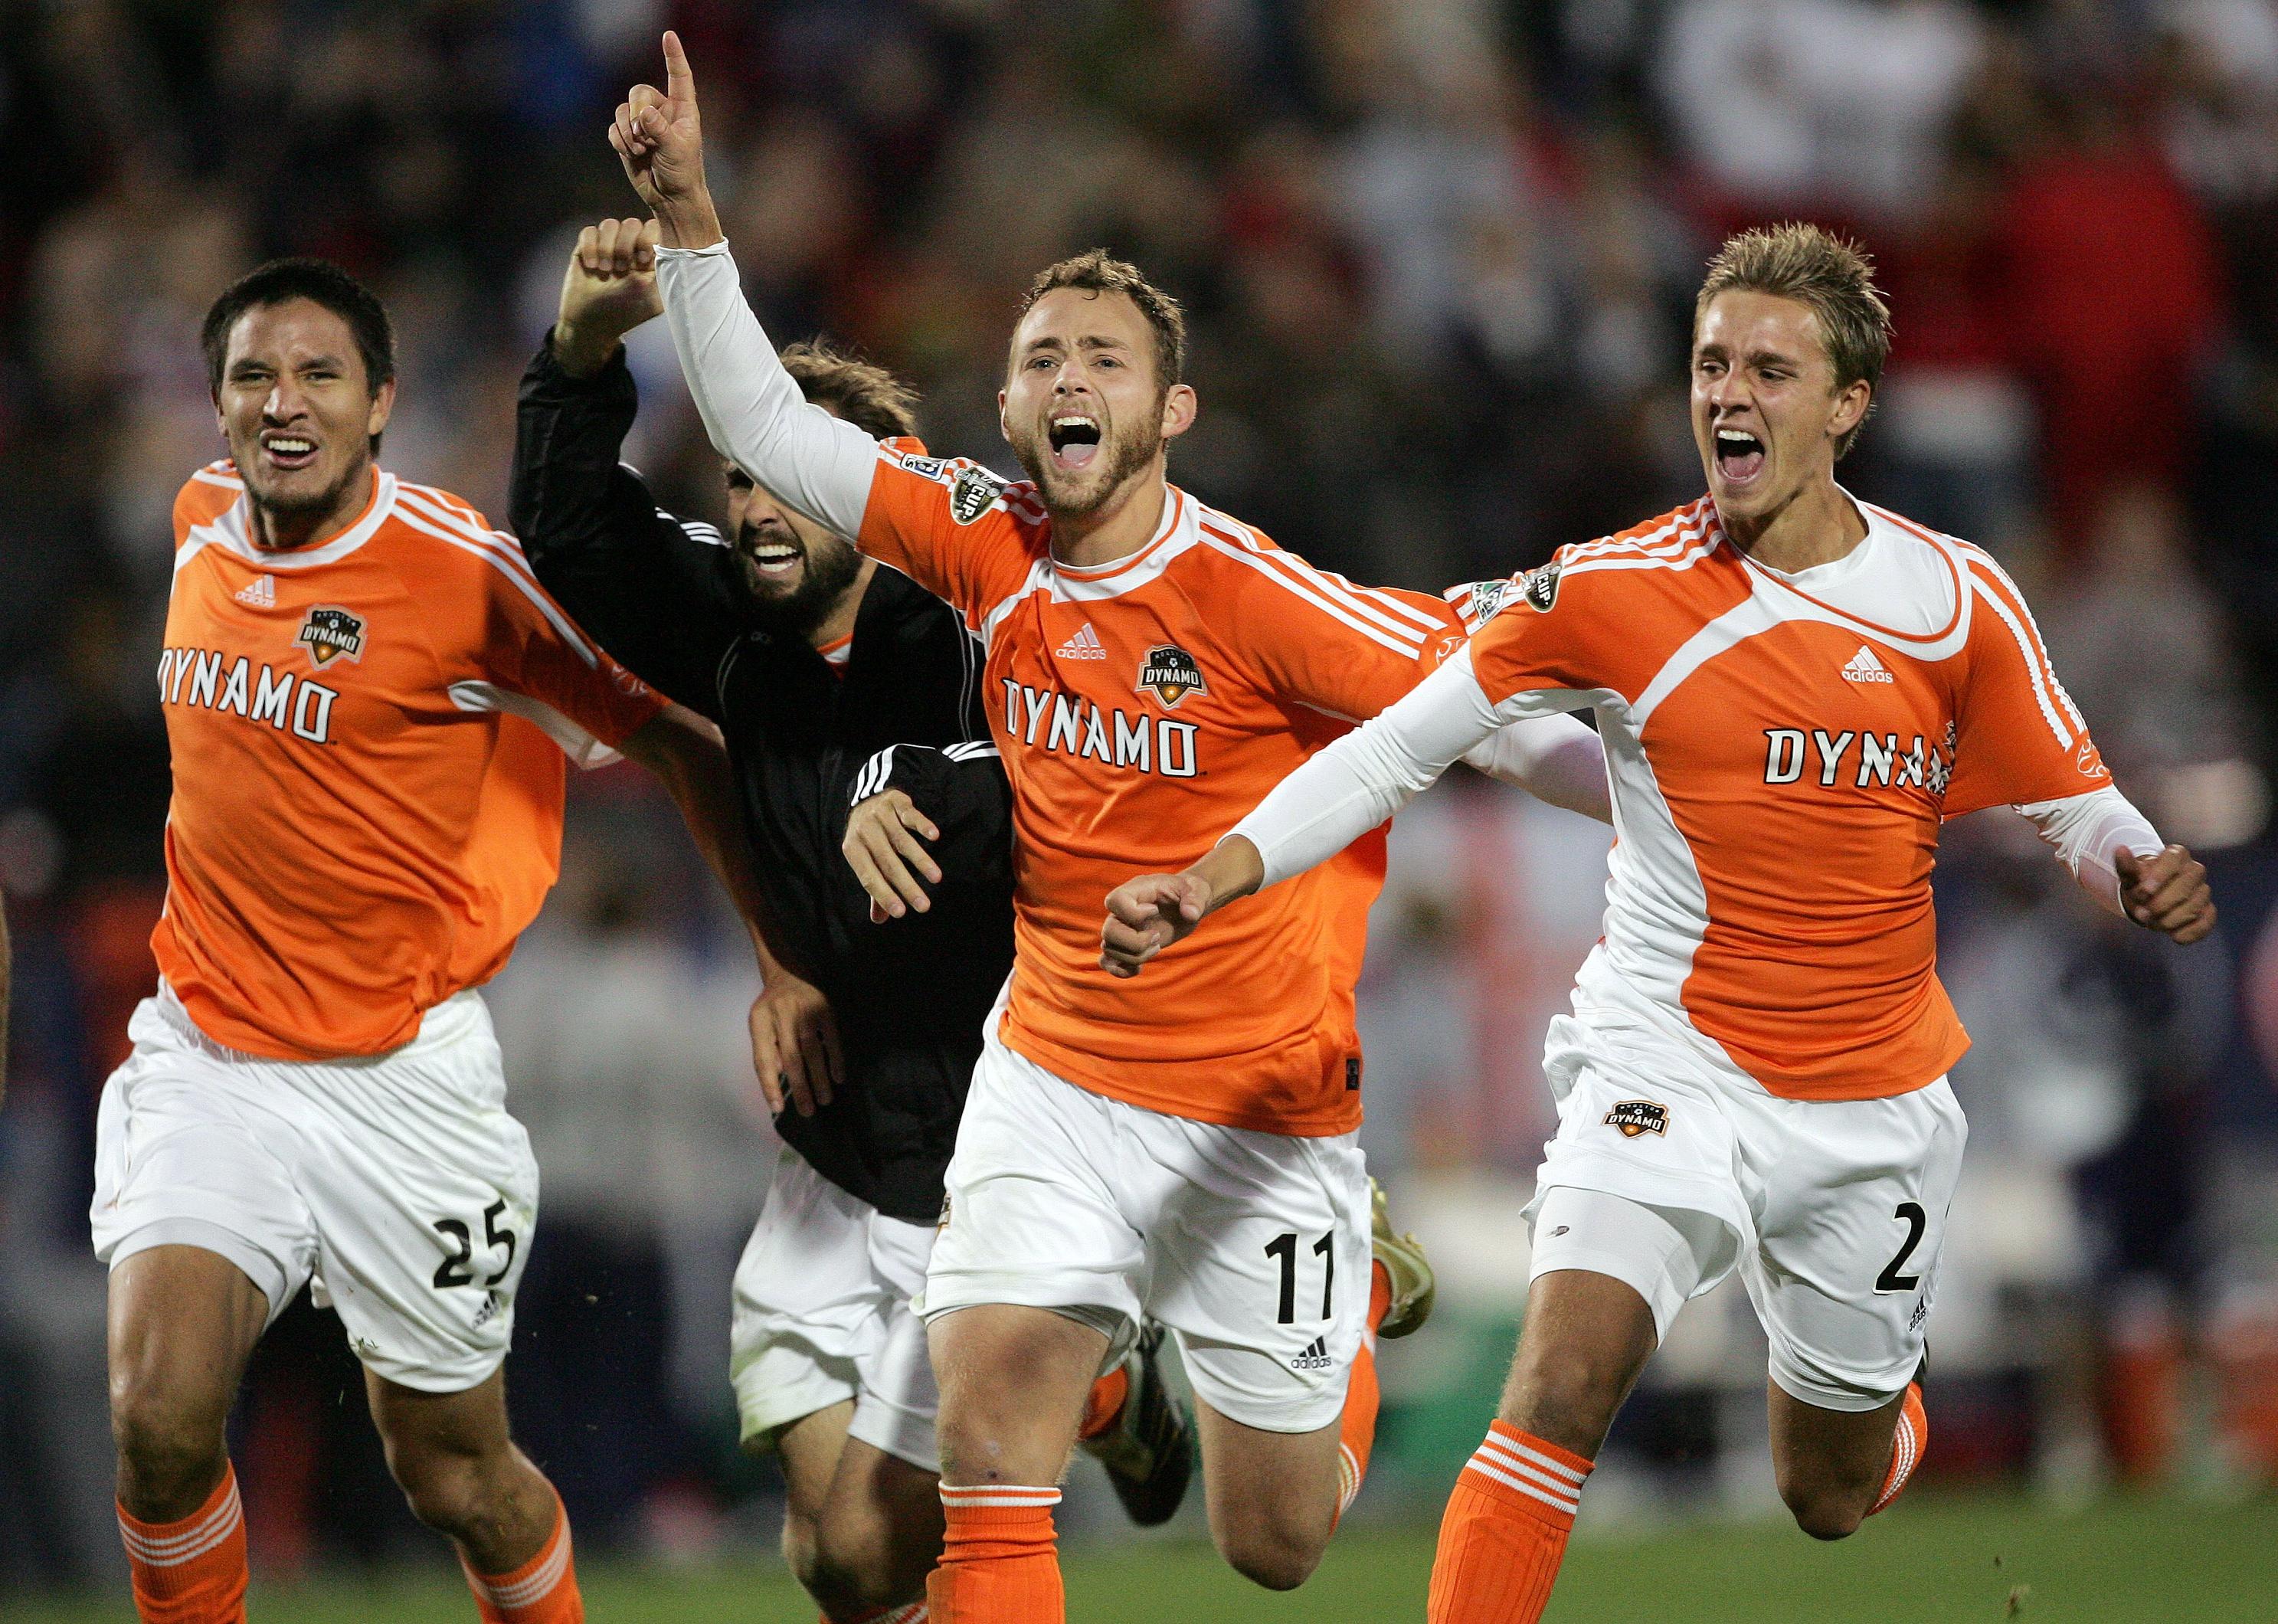 Houston Dynamo's Brian Ching, Ryan Mullan, Brad Davis, and Stuart Holden react after goalkeeper made a save on a shot.